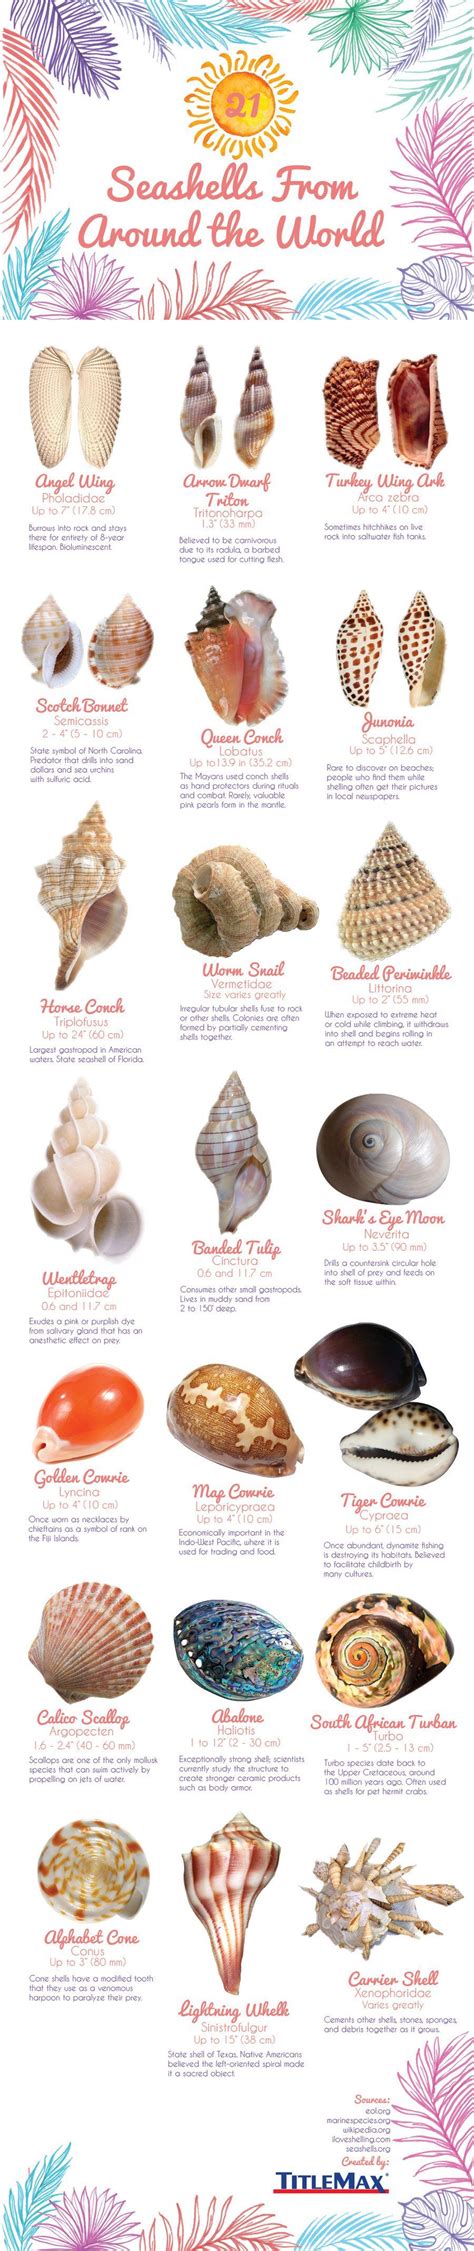 Seashells From Around The World Infographic Identification Guide